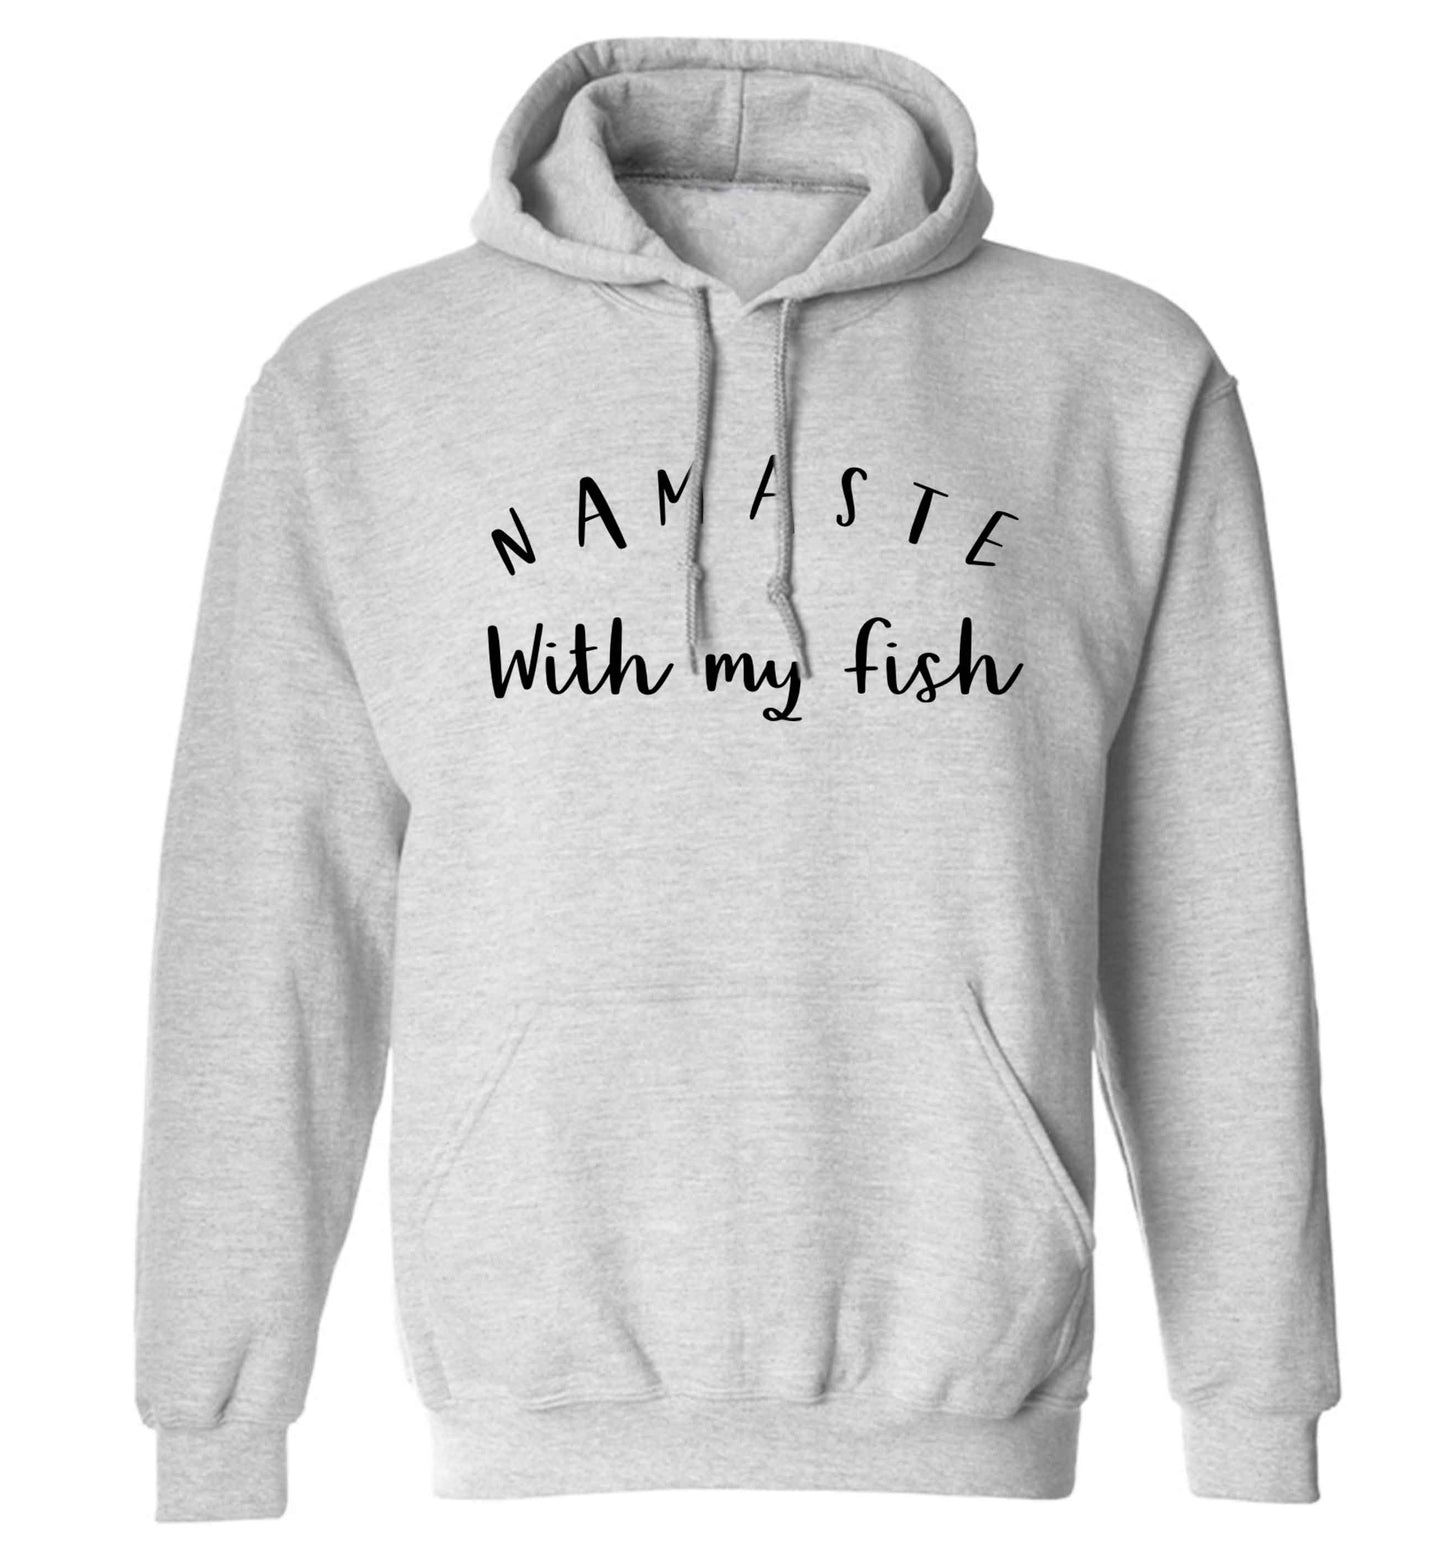 Namaste with my fish adults unisex grey hoodie 2XL